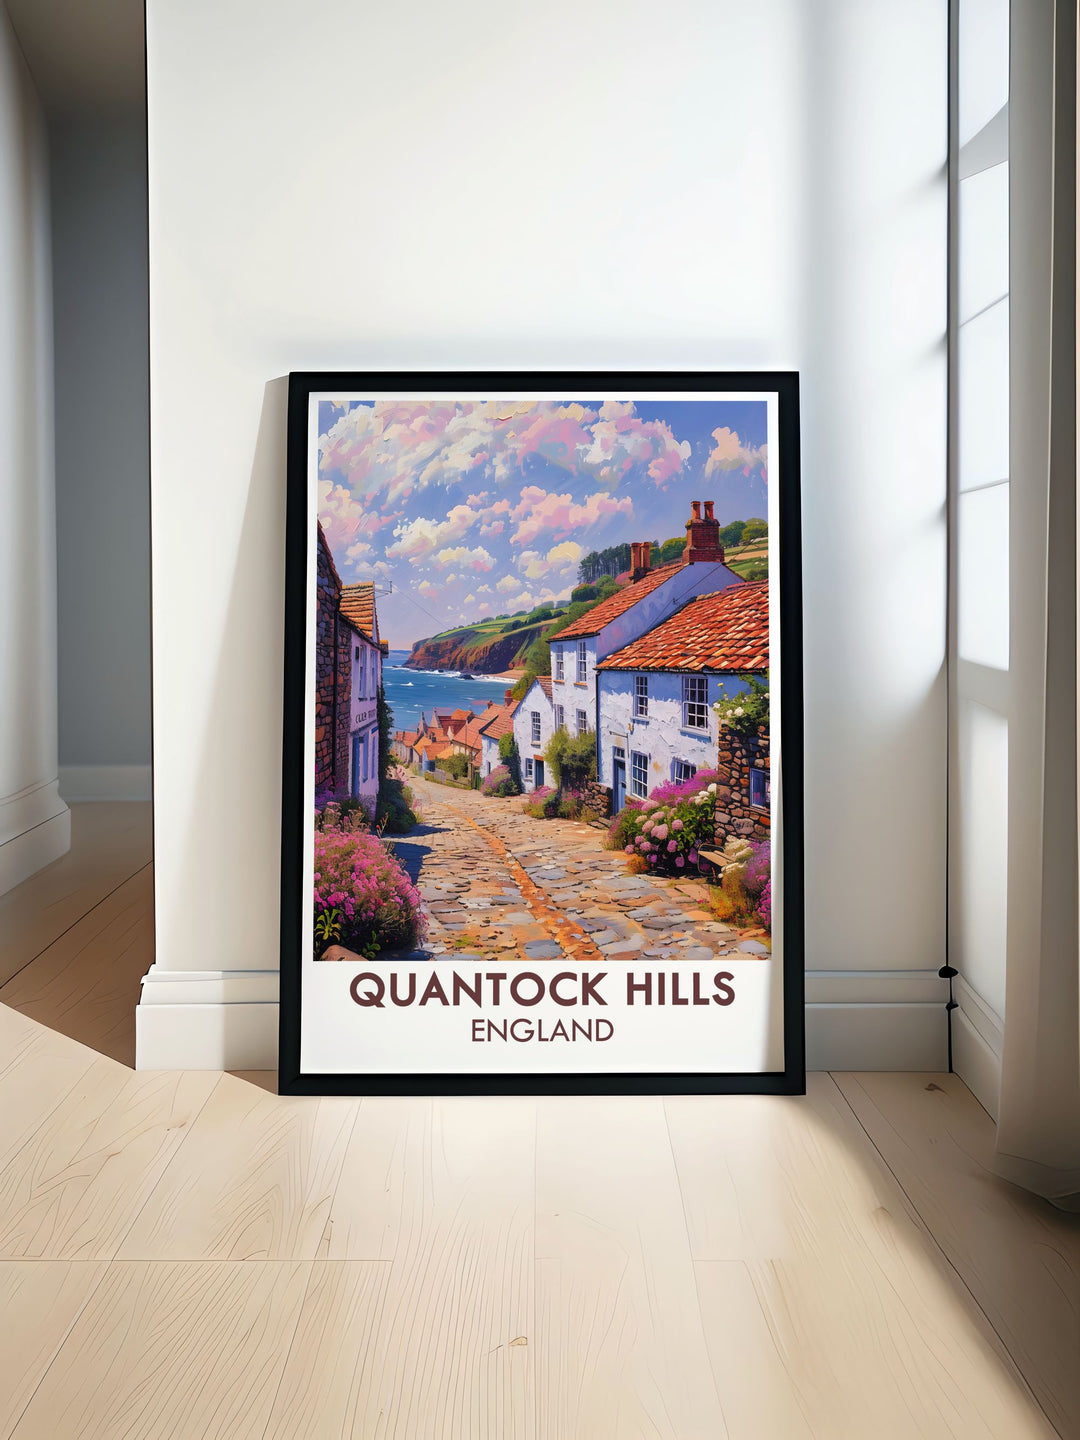 Nether Stowey vintage travel print showcasing the serene beauty of Quantock Hills AONB and Somerset AONB perfect for home decor and travel enthusiasts who appreciate Somerset Travel Art and the picturesque views of Vale Taunton Deane and Quantock Heath.